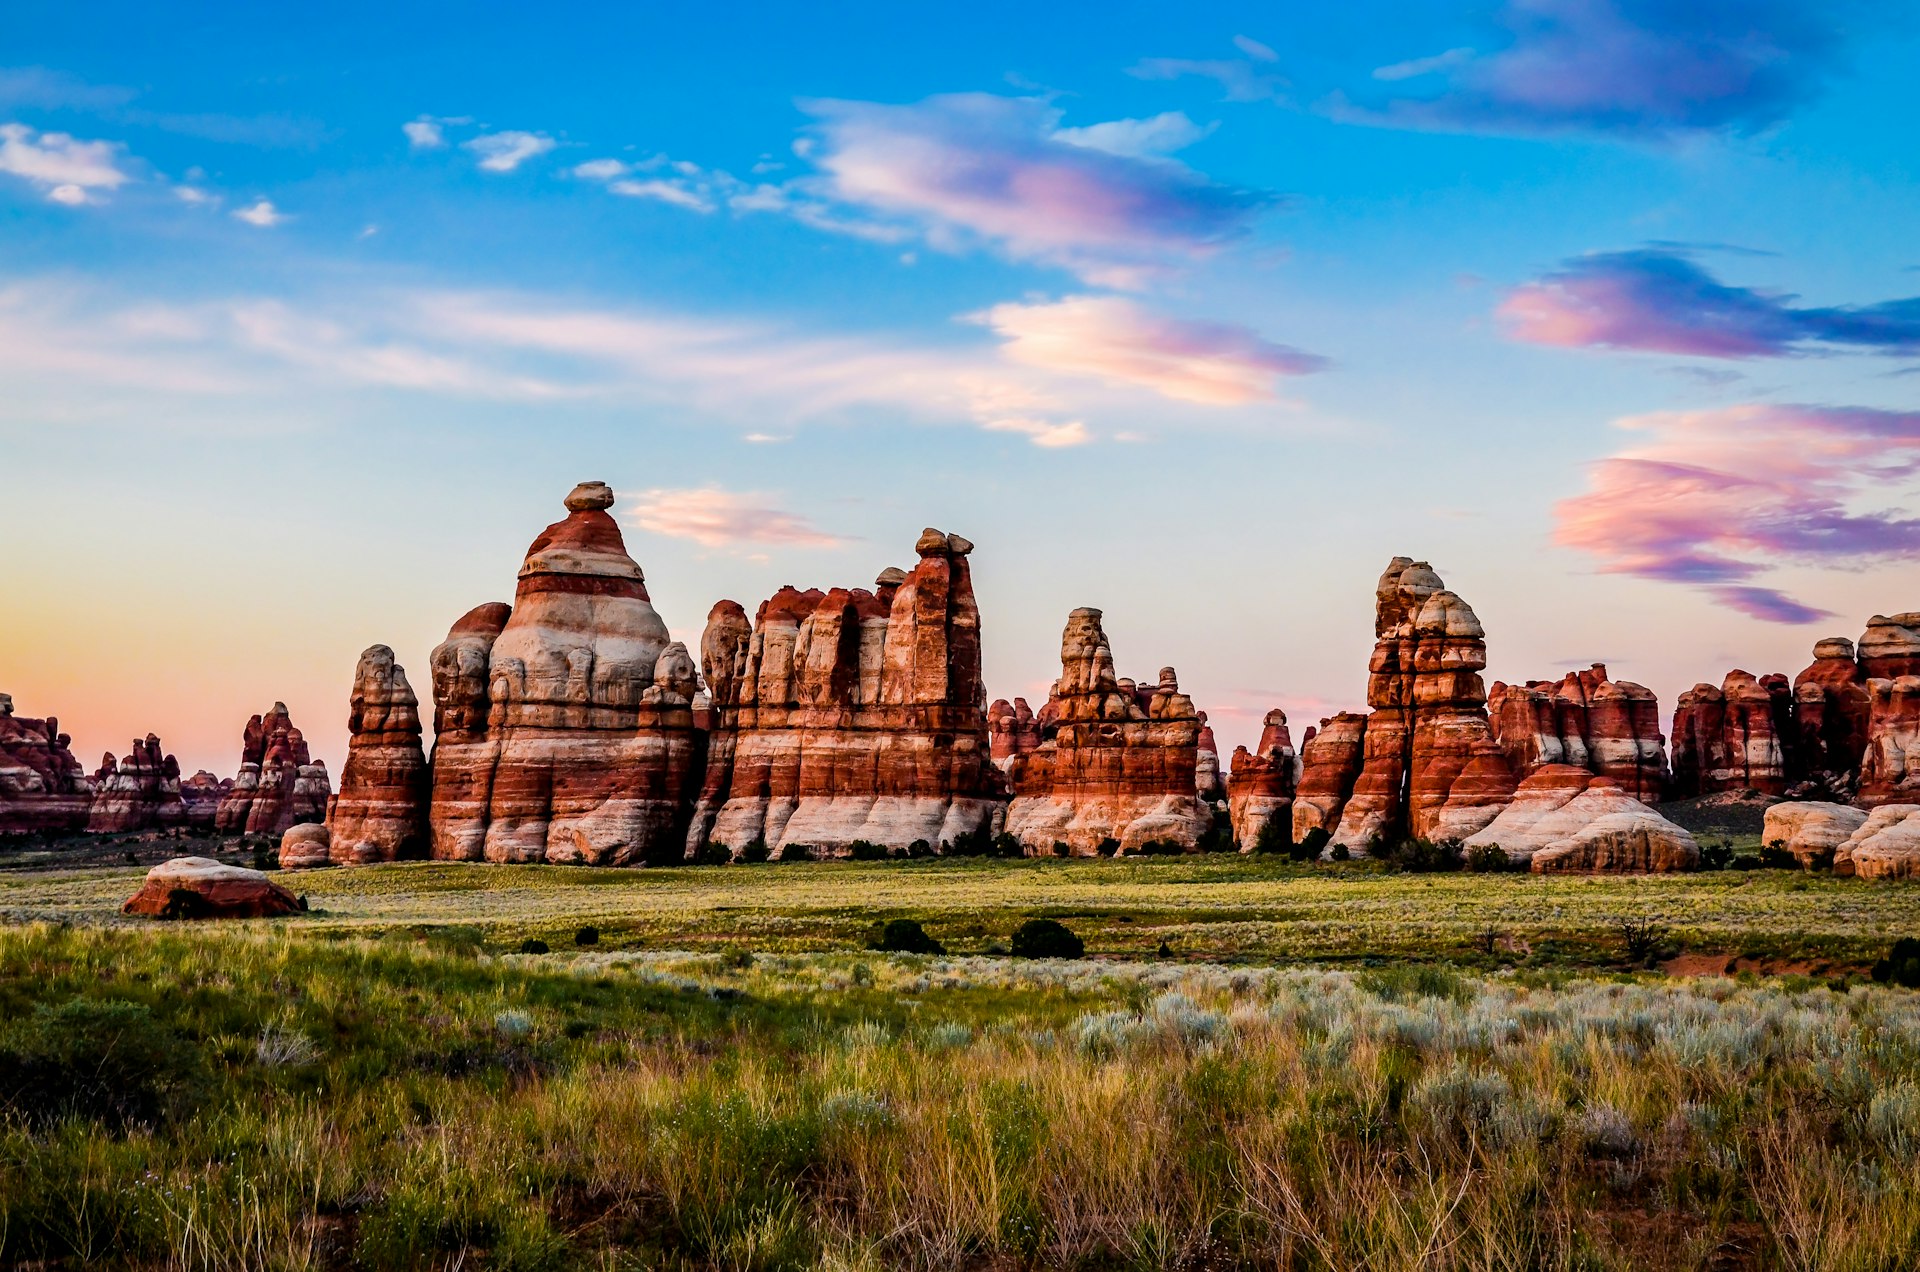 Chesler Park at The Needles District of Canyonlands in Utah